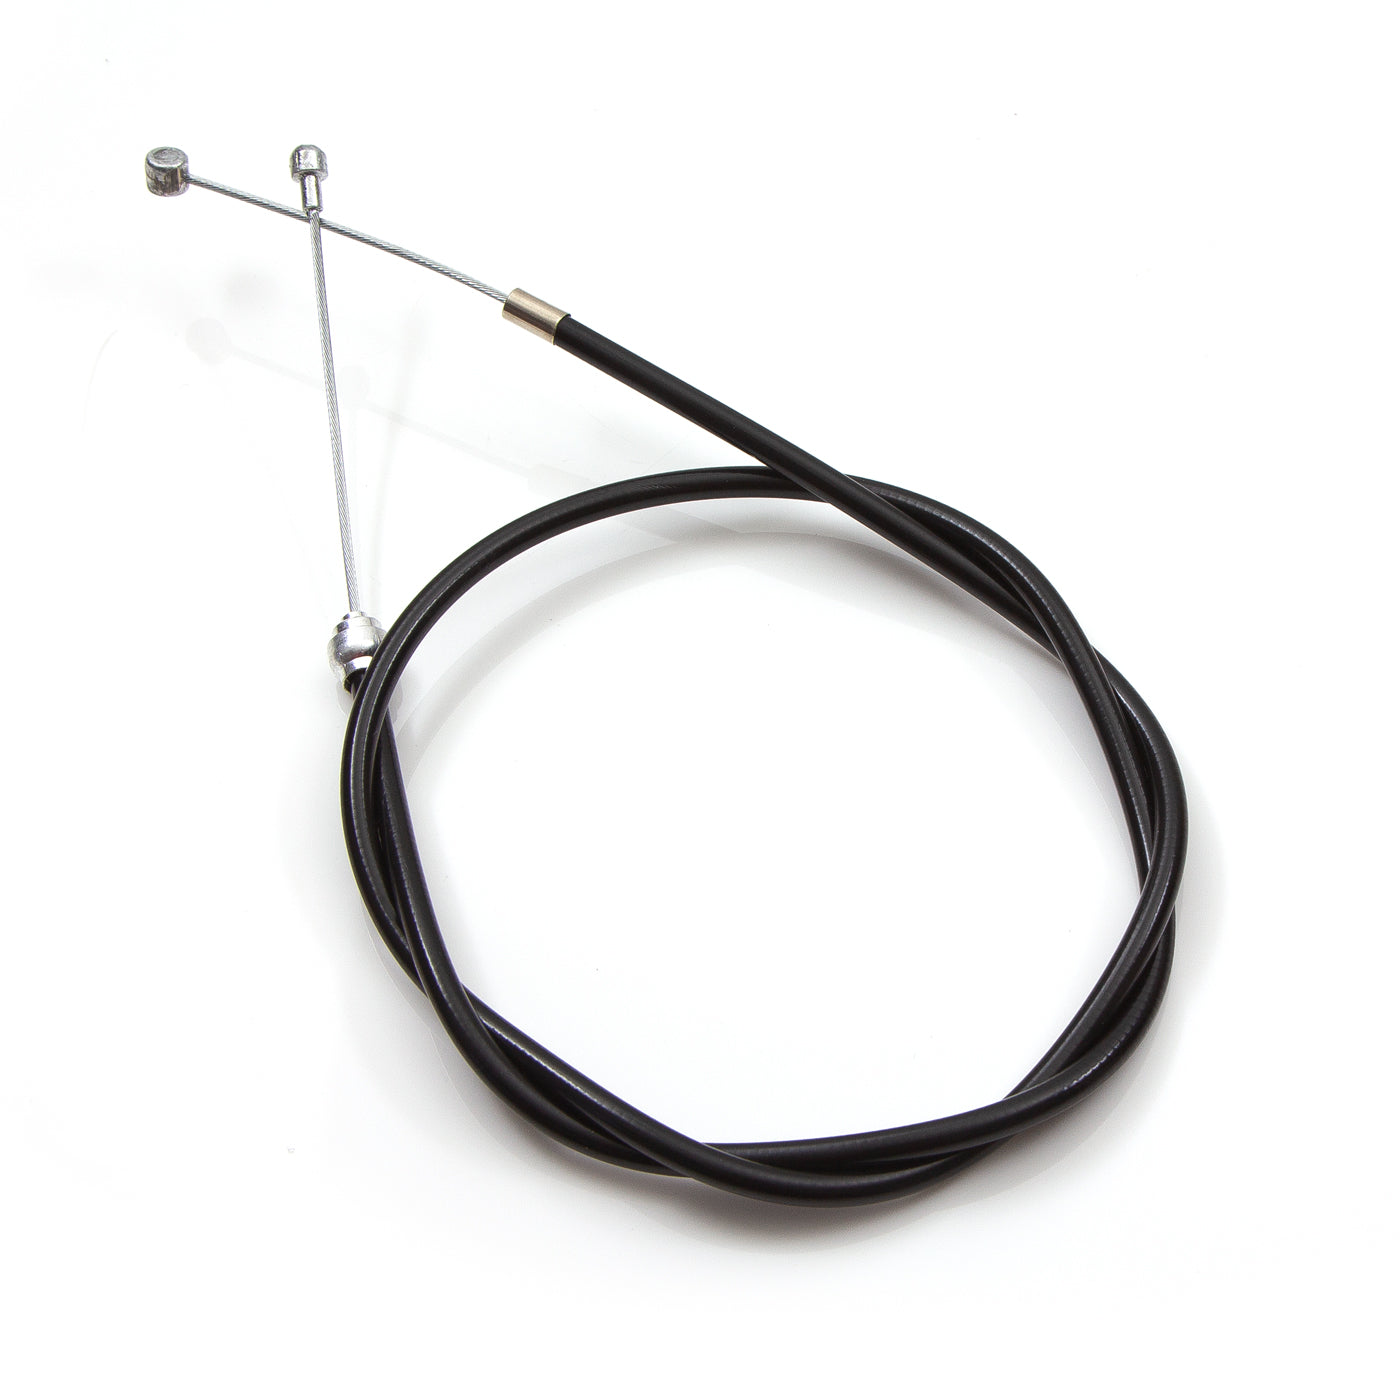 View Clarks Front Brake Cable RoadMTBHybrid information